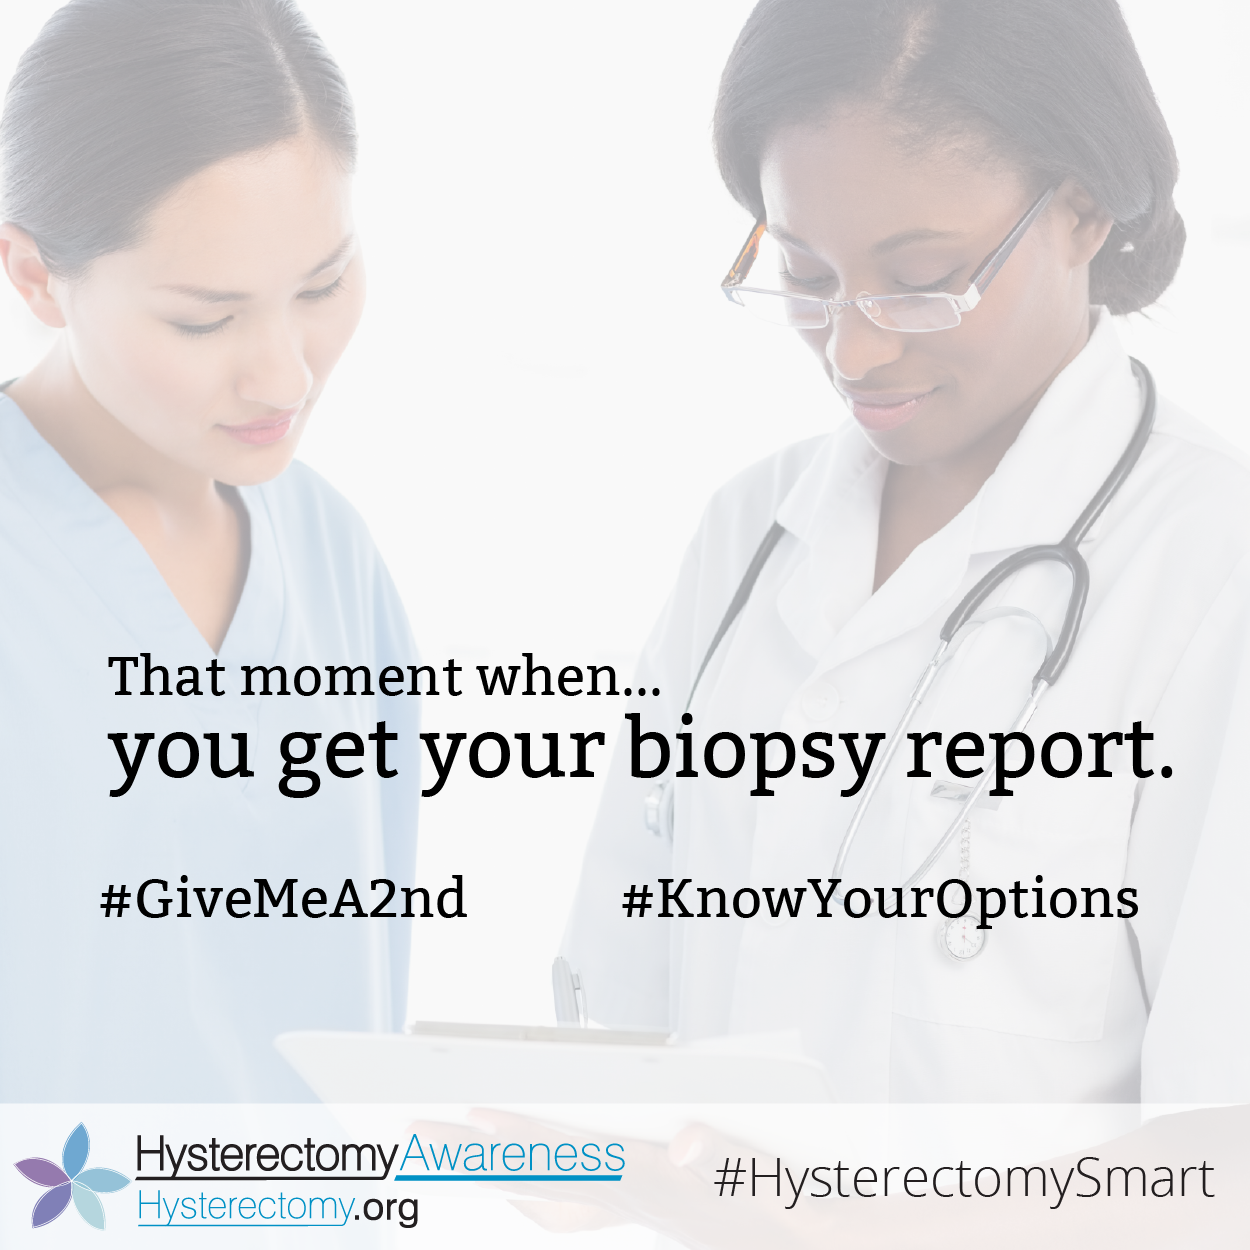 The moment when you get your biopsy report. #GiveMeA2nd #KnowYourOptions – #HysterectomySmart